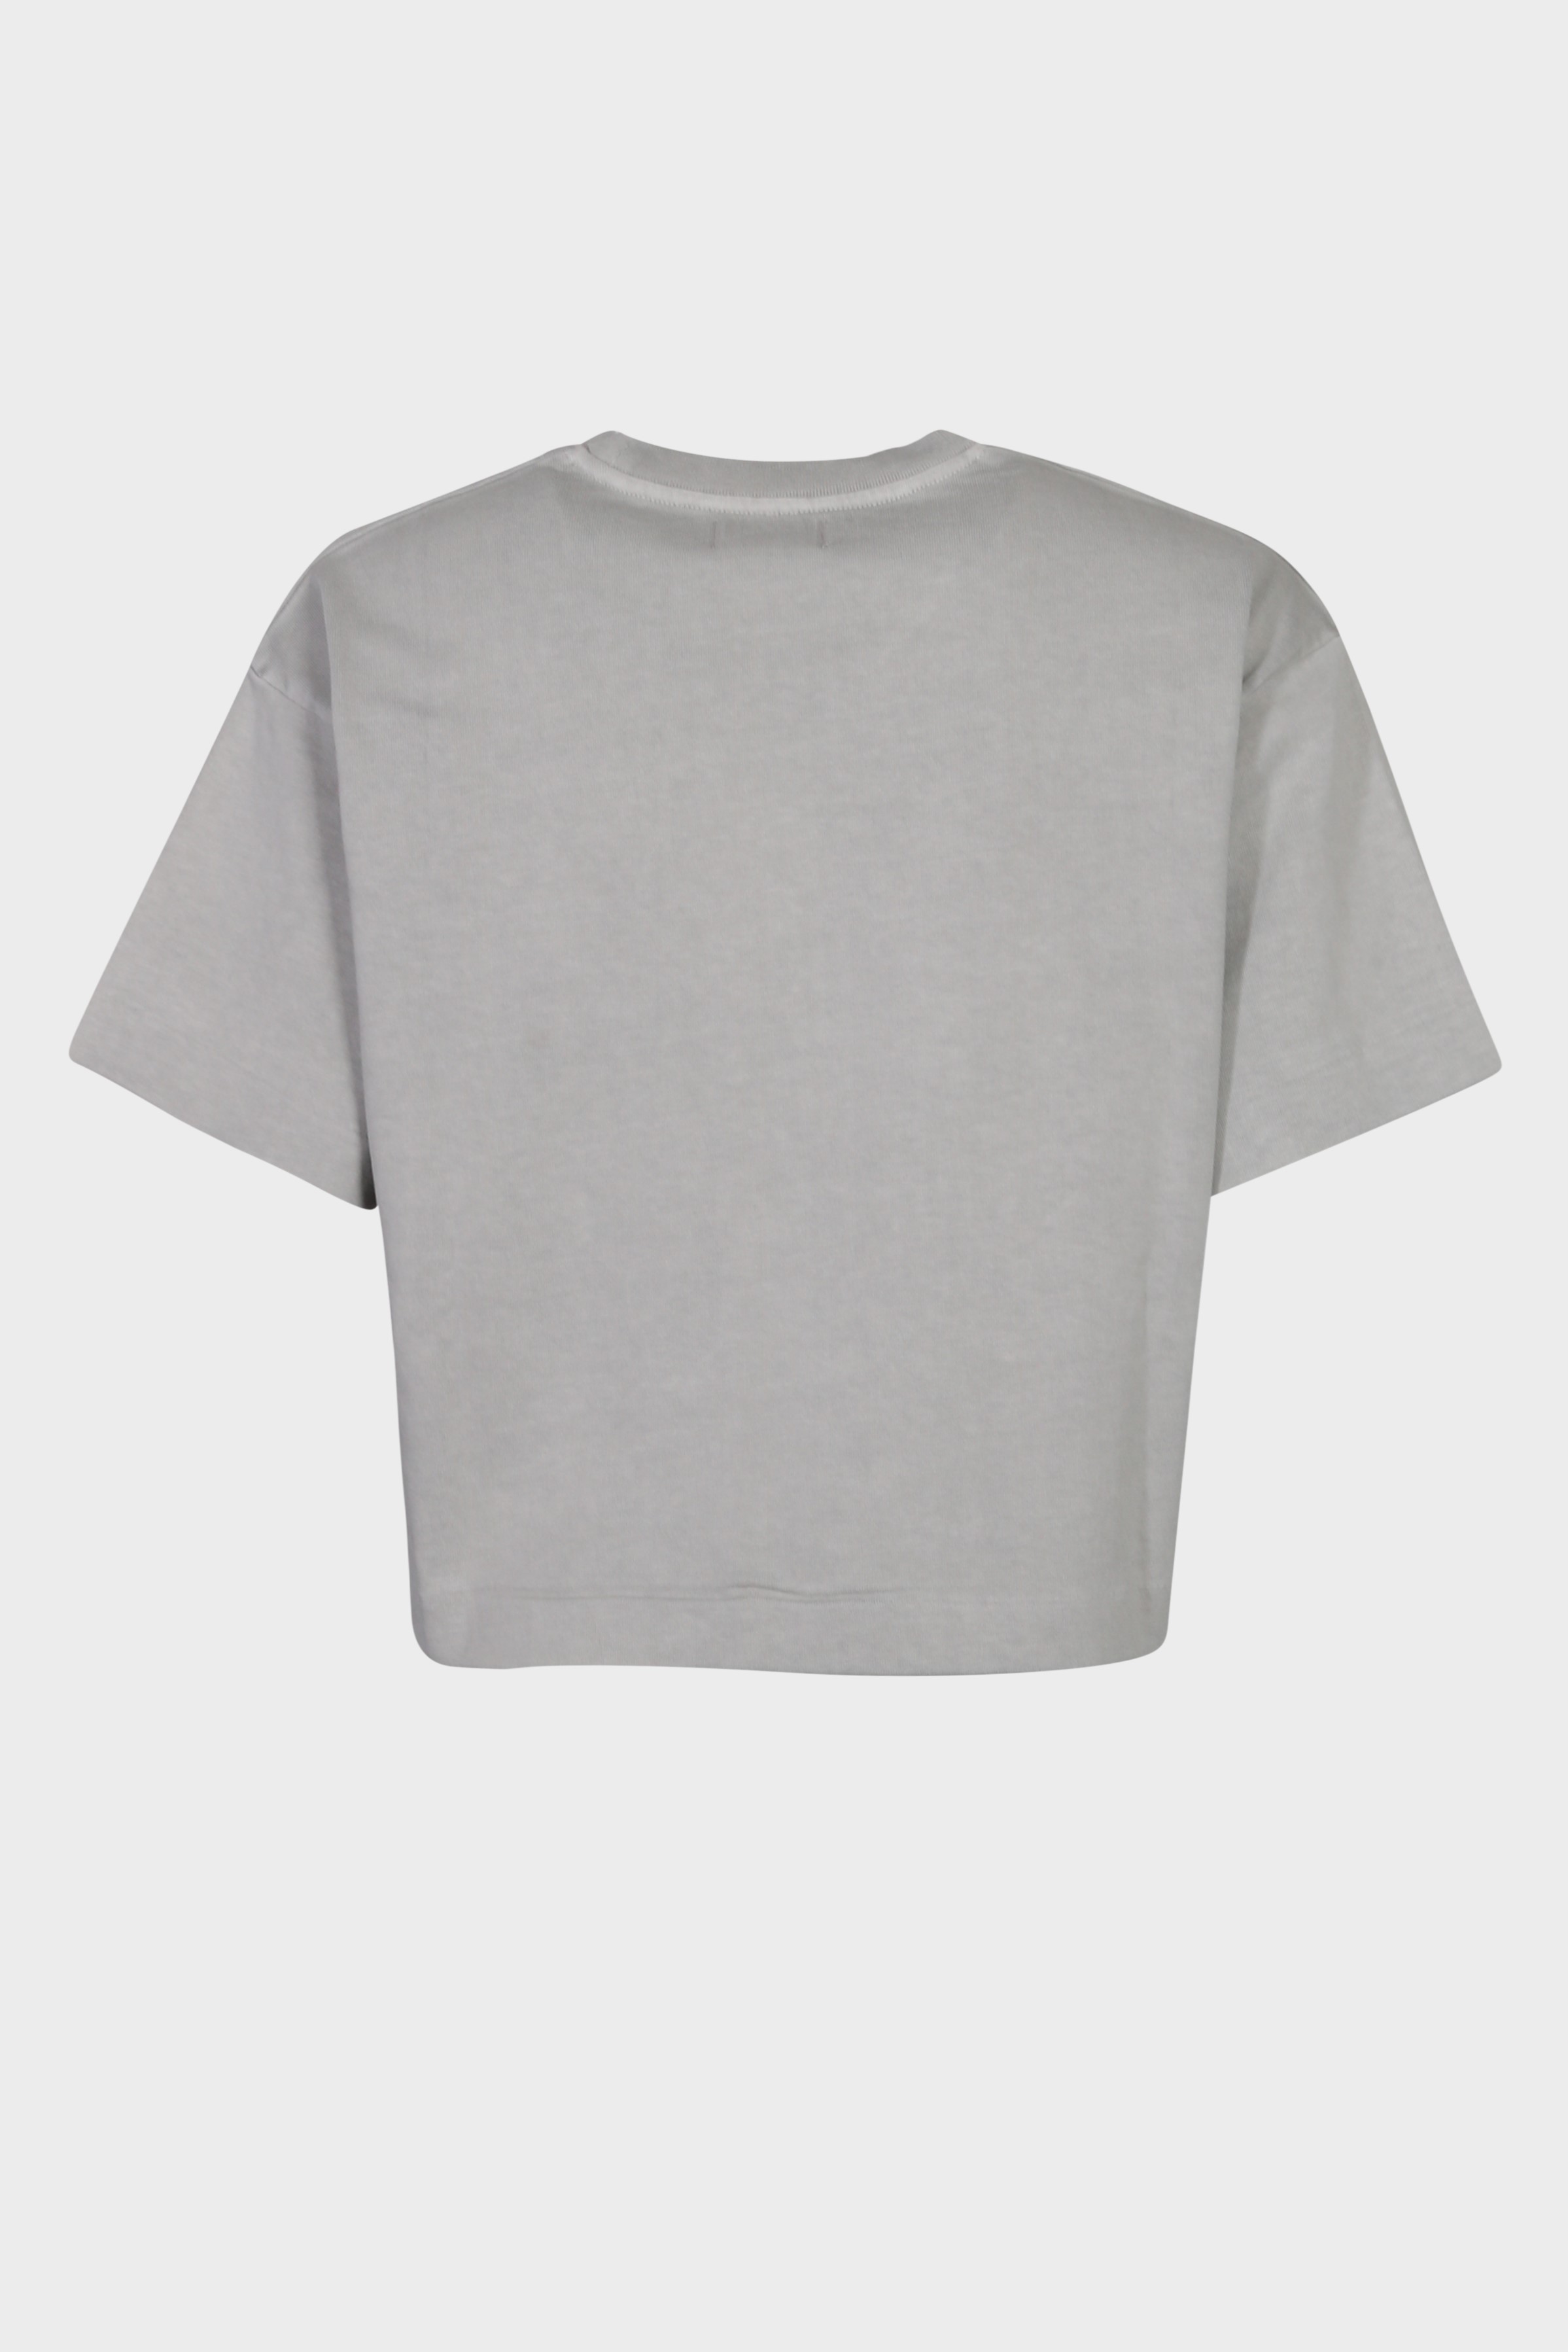 AUTRY ACTION PEOPLE Apparel T-Shirt in Grey Melange M